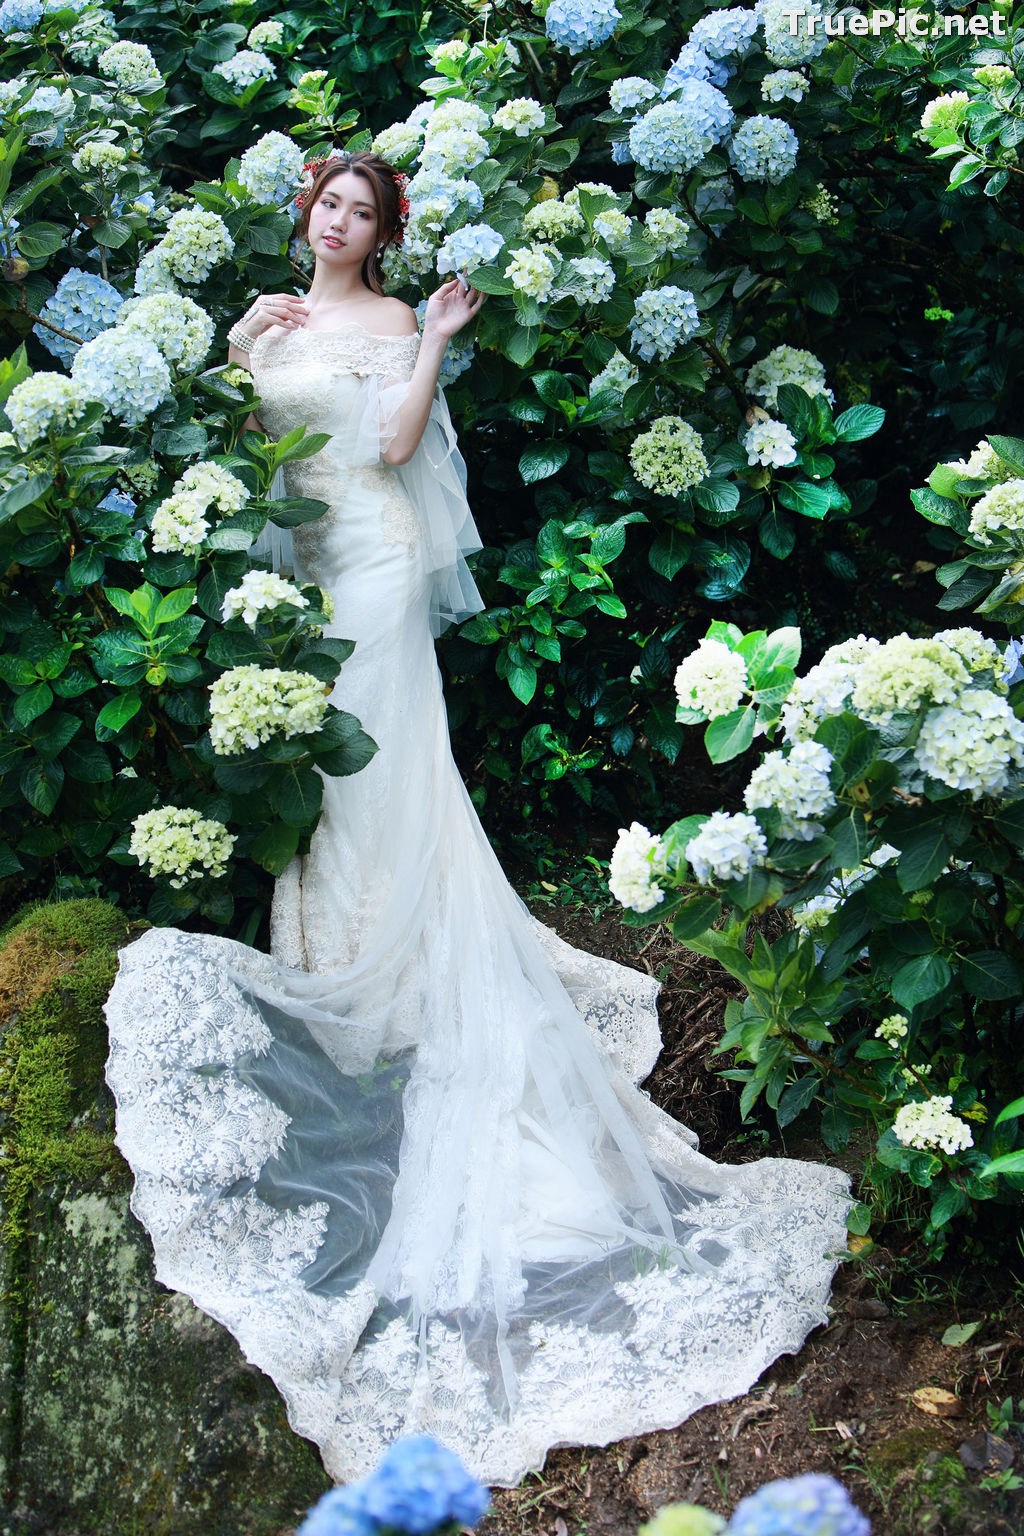 Image Taiwanese Model - 張倫甄 - Beautiful Bride and Hydrangea Flowers - TruePic.net - Picture-58